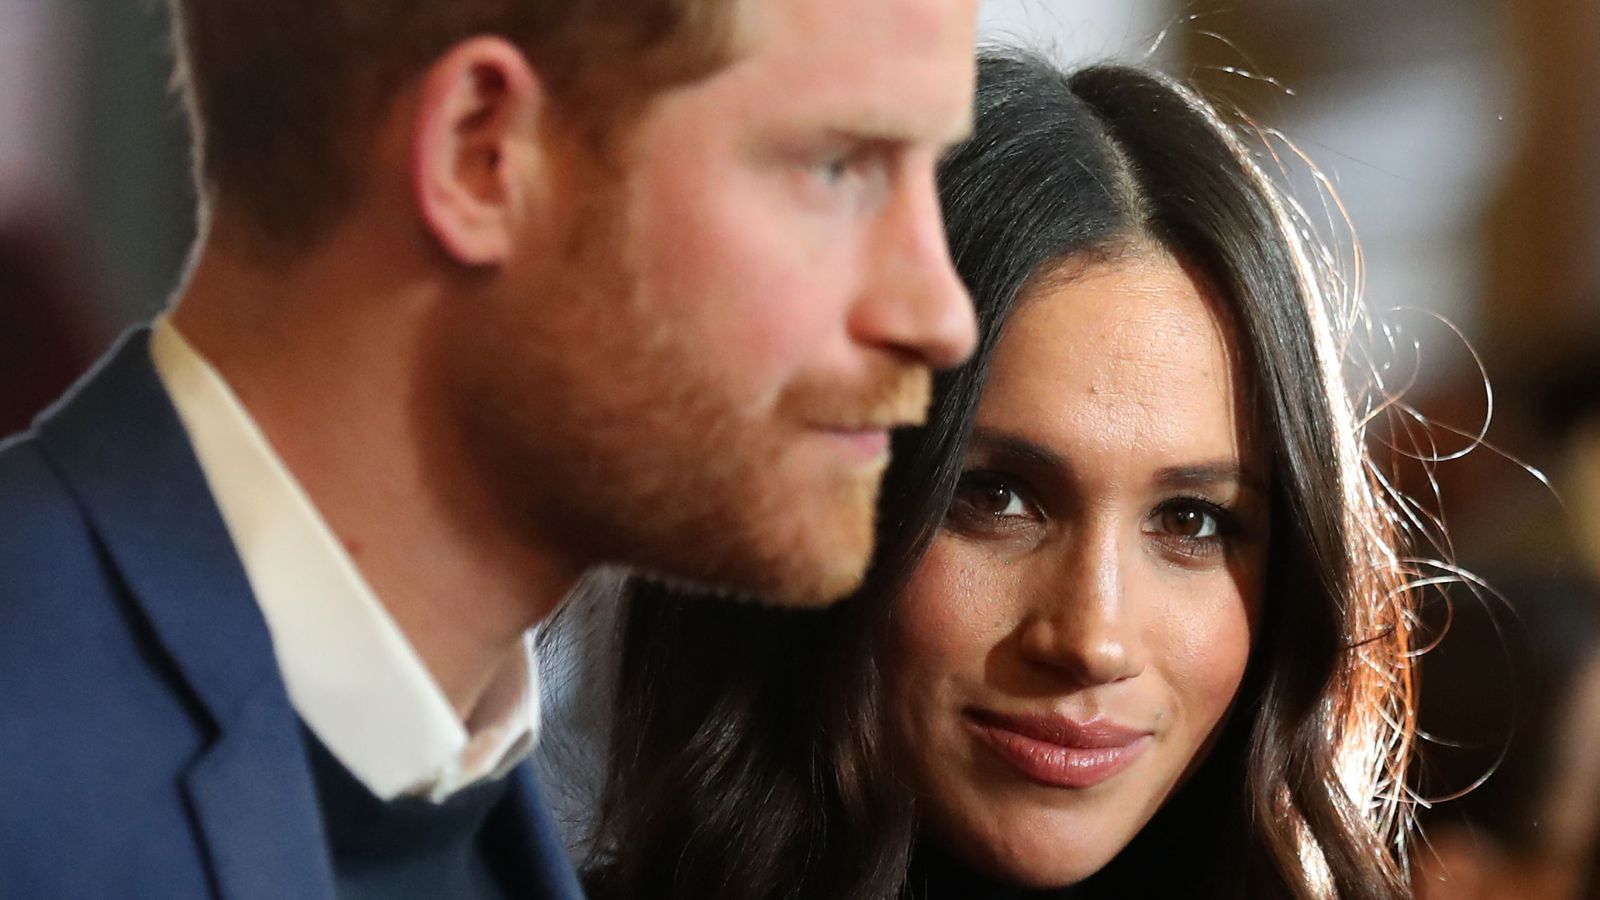 Harry and Meghan to lose royal funds and drop HRH titles from spring